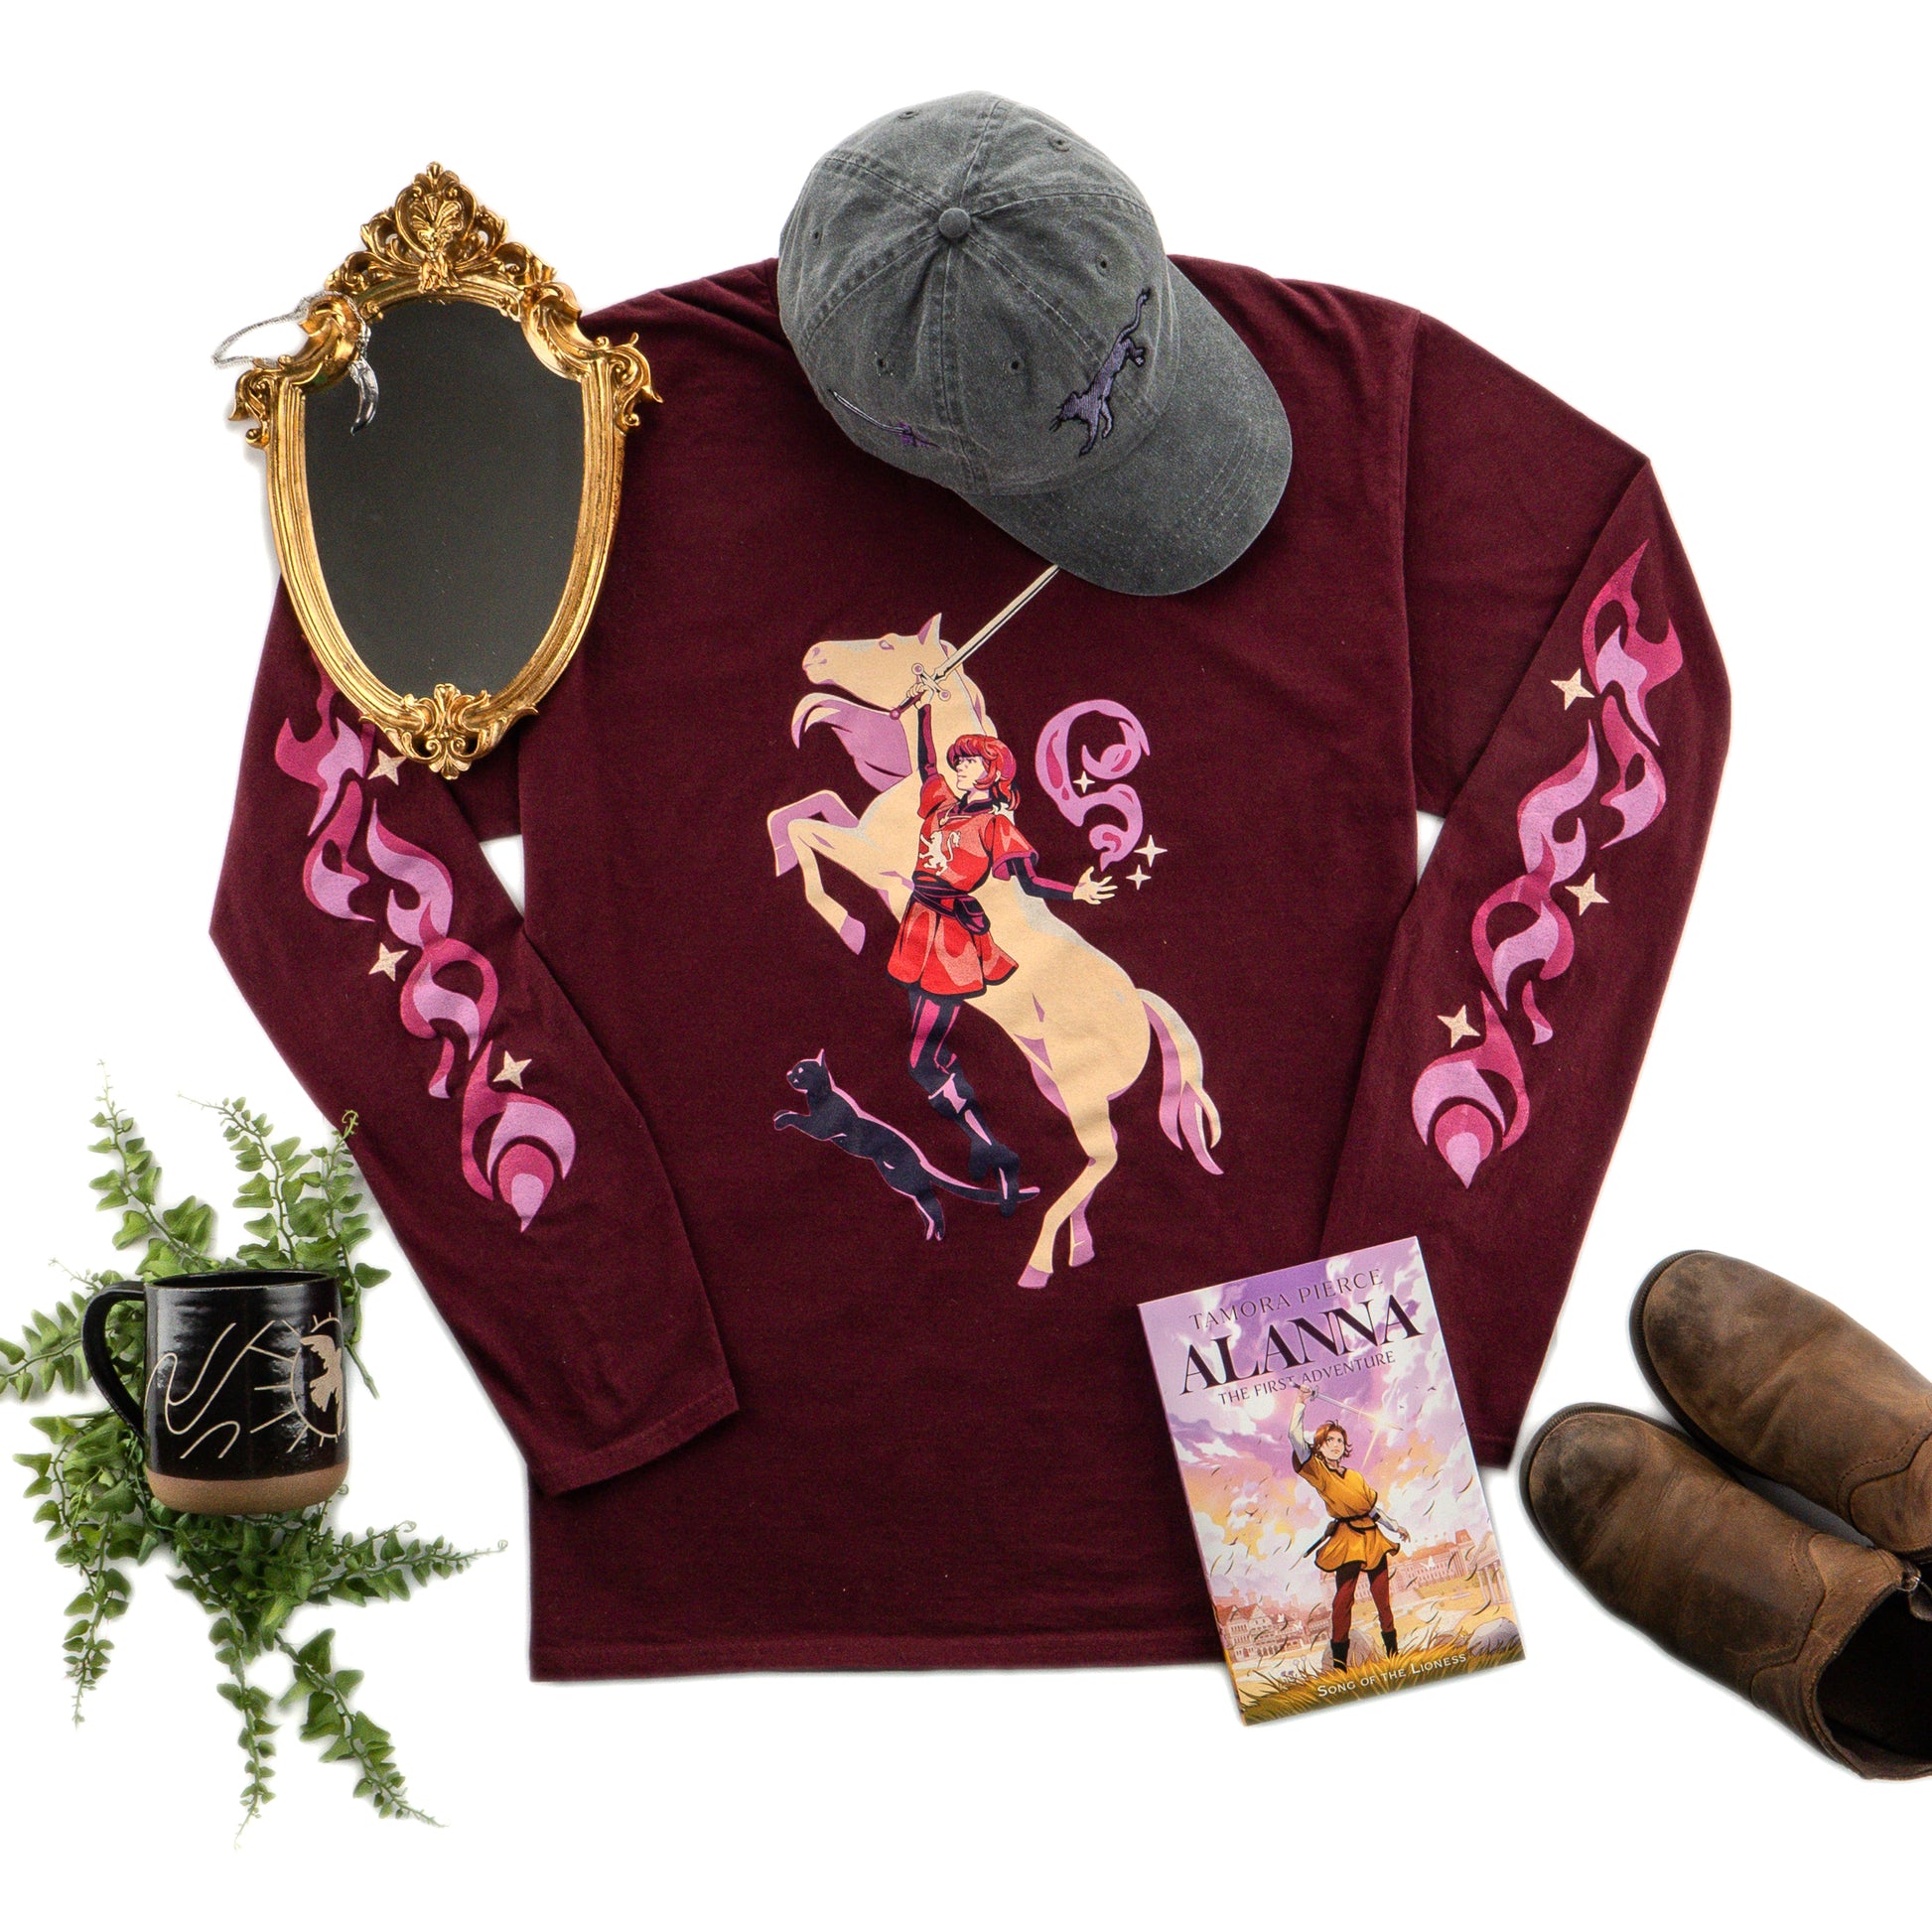 the maroon t-shirt is laid flat, surrounded by brown boots, an Alanna book, a black ballcap, a mirror, and foliage.